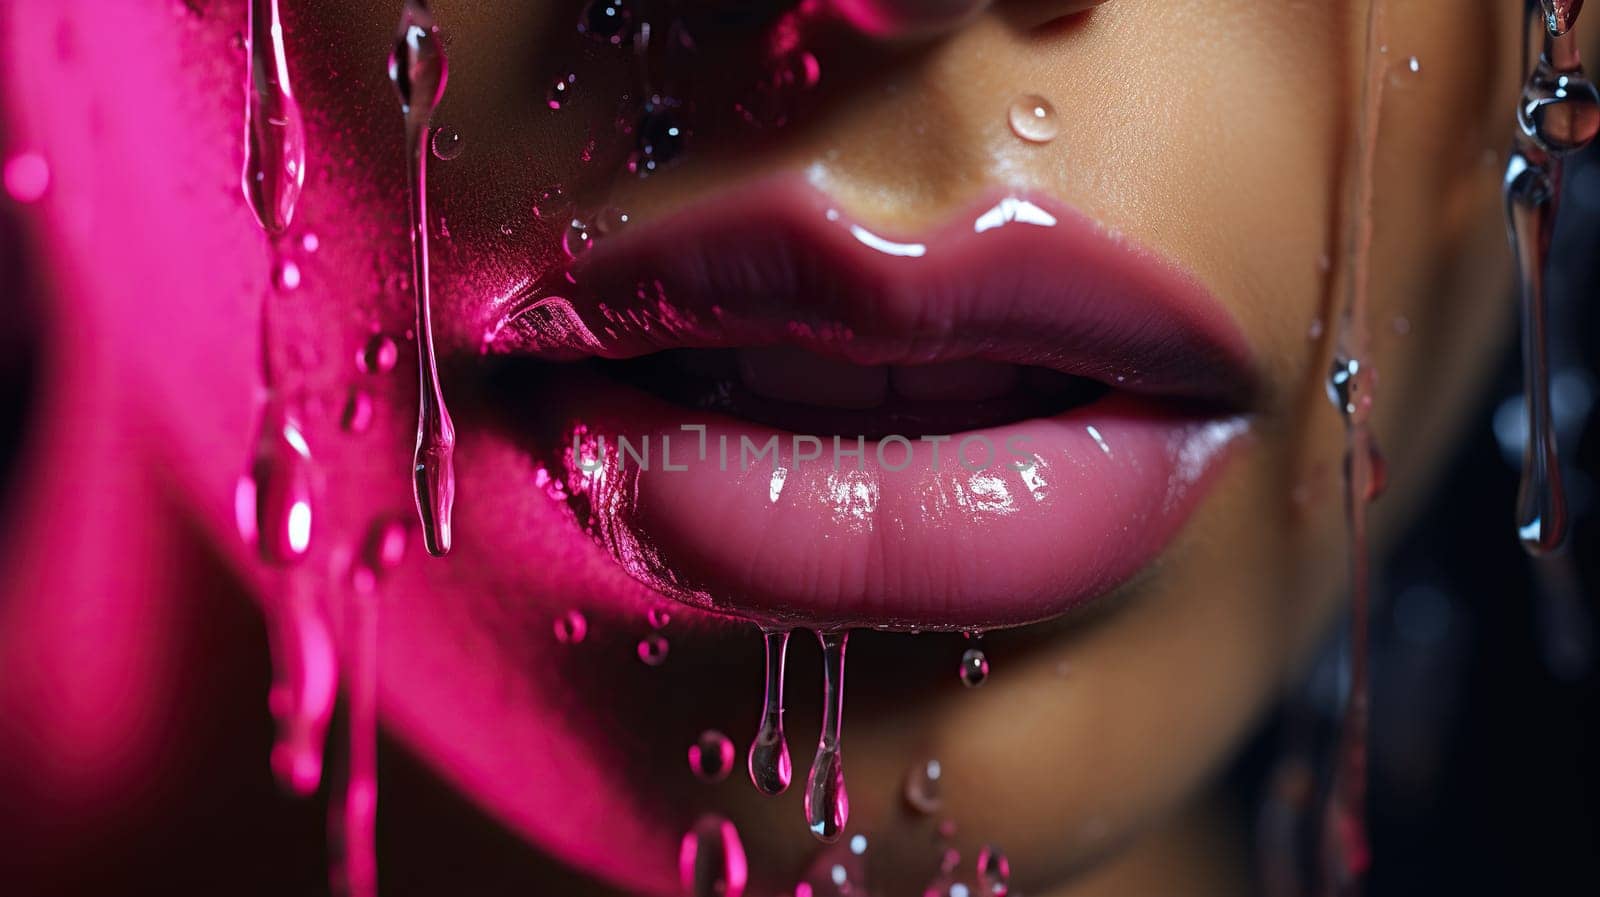 Juicy female lips with pink lipstick and water drops in neon lighting.